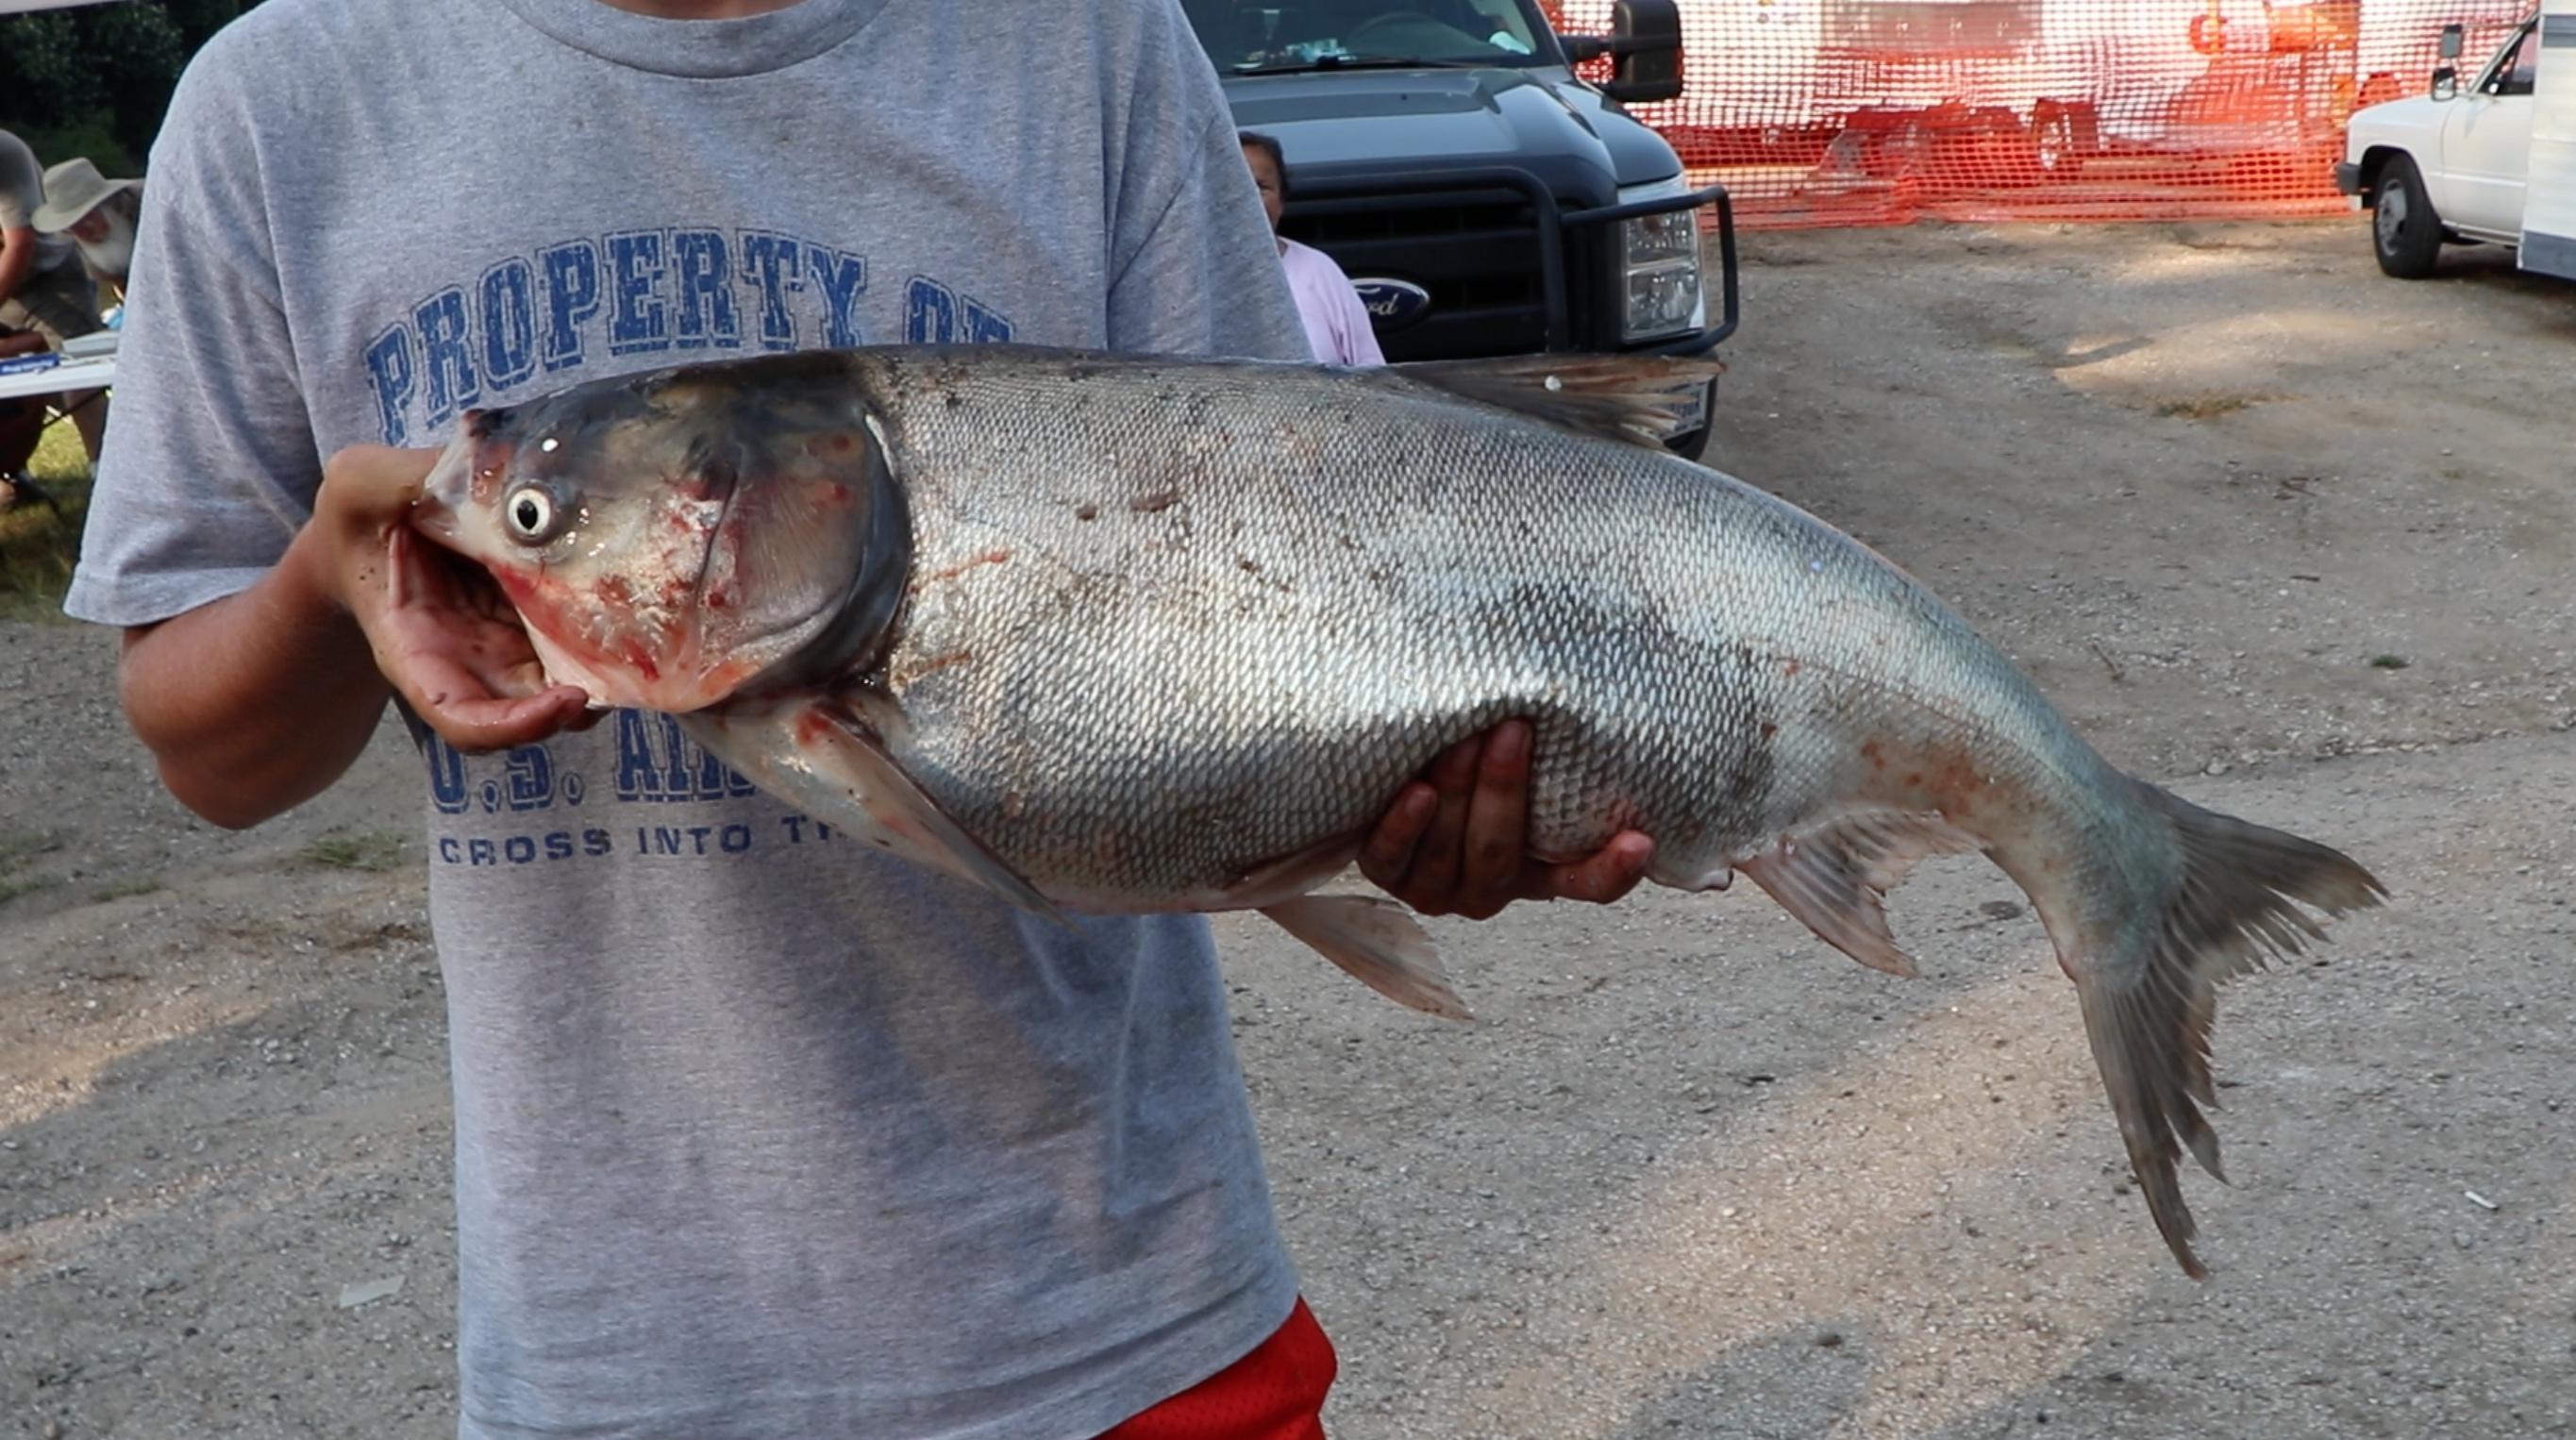 Silver carp's "startle response" is jumping out of the water due to the noise and pressure waves caused by boat motors. (Evan Garcia / Chicago Tonight)